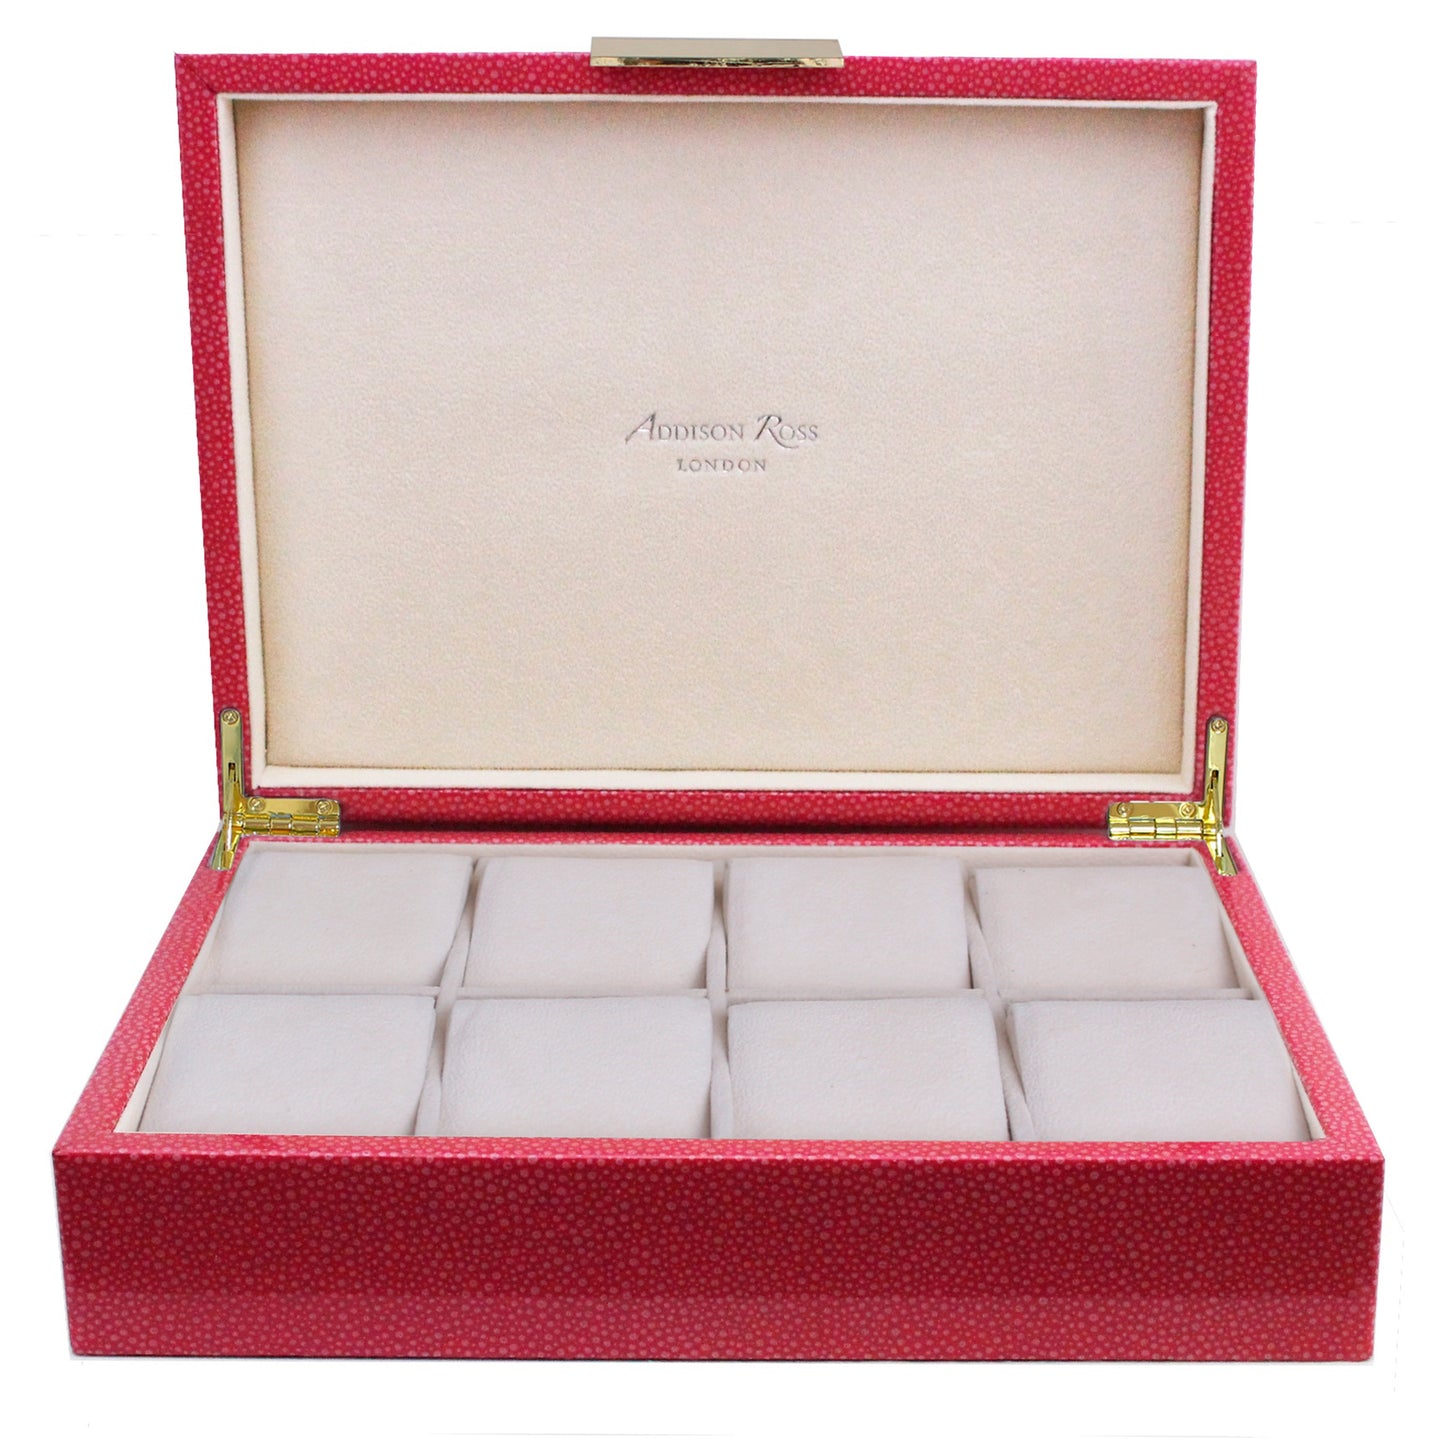 Large pink watch box with cream suede interior